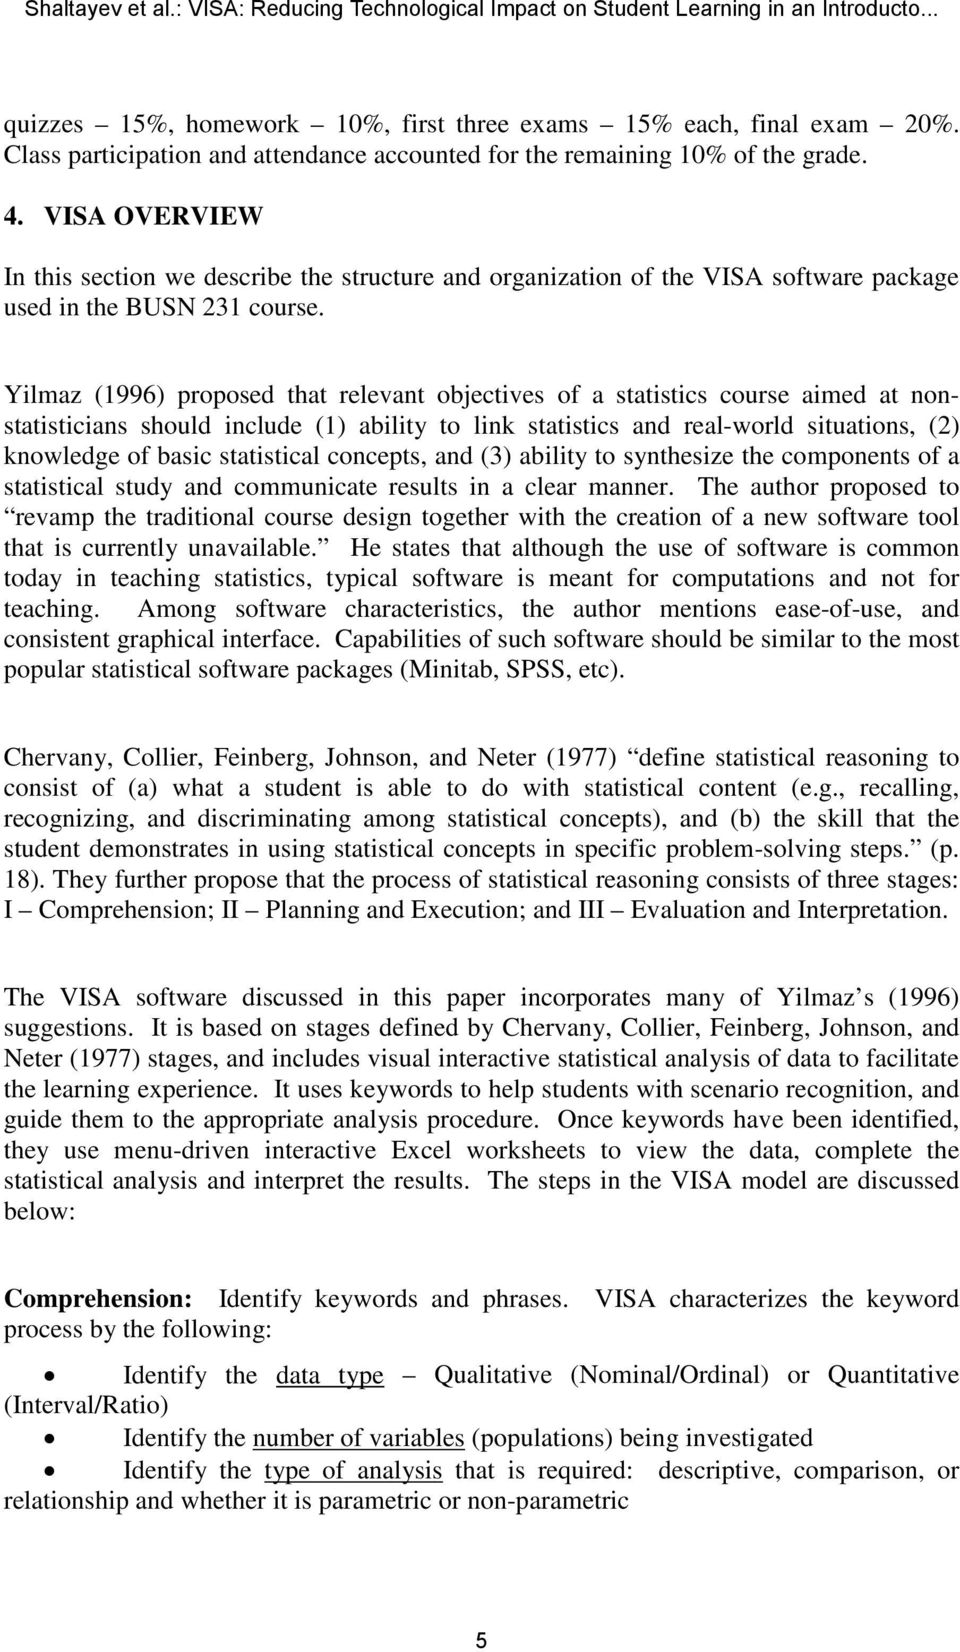 VISA OVERVIEW In this section we describe the structure and organization of the VISA software package used in the BUSN 231 course.